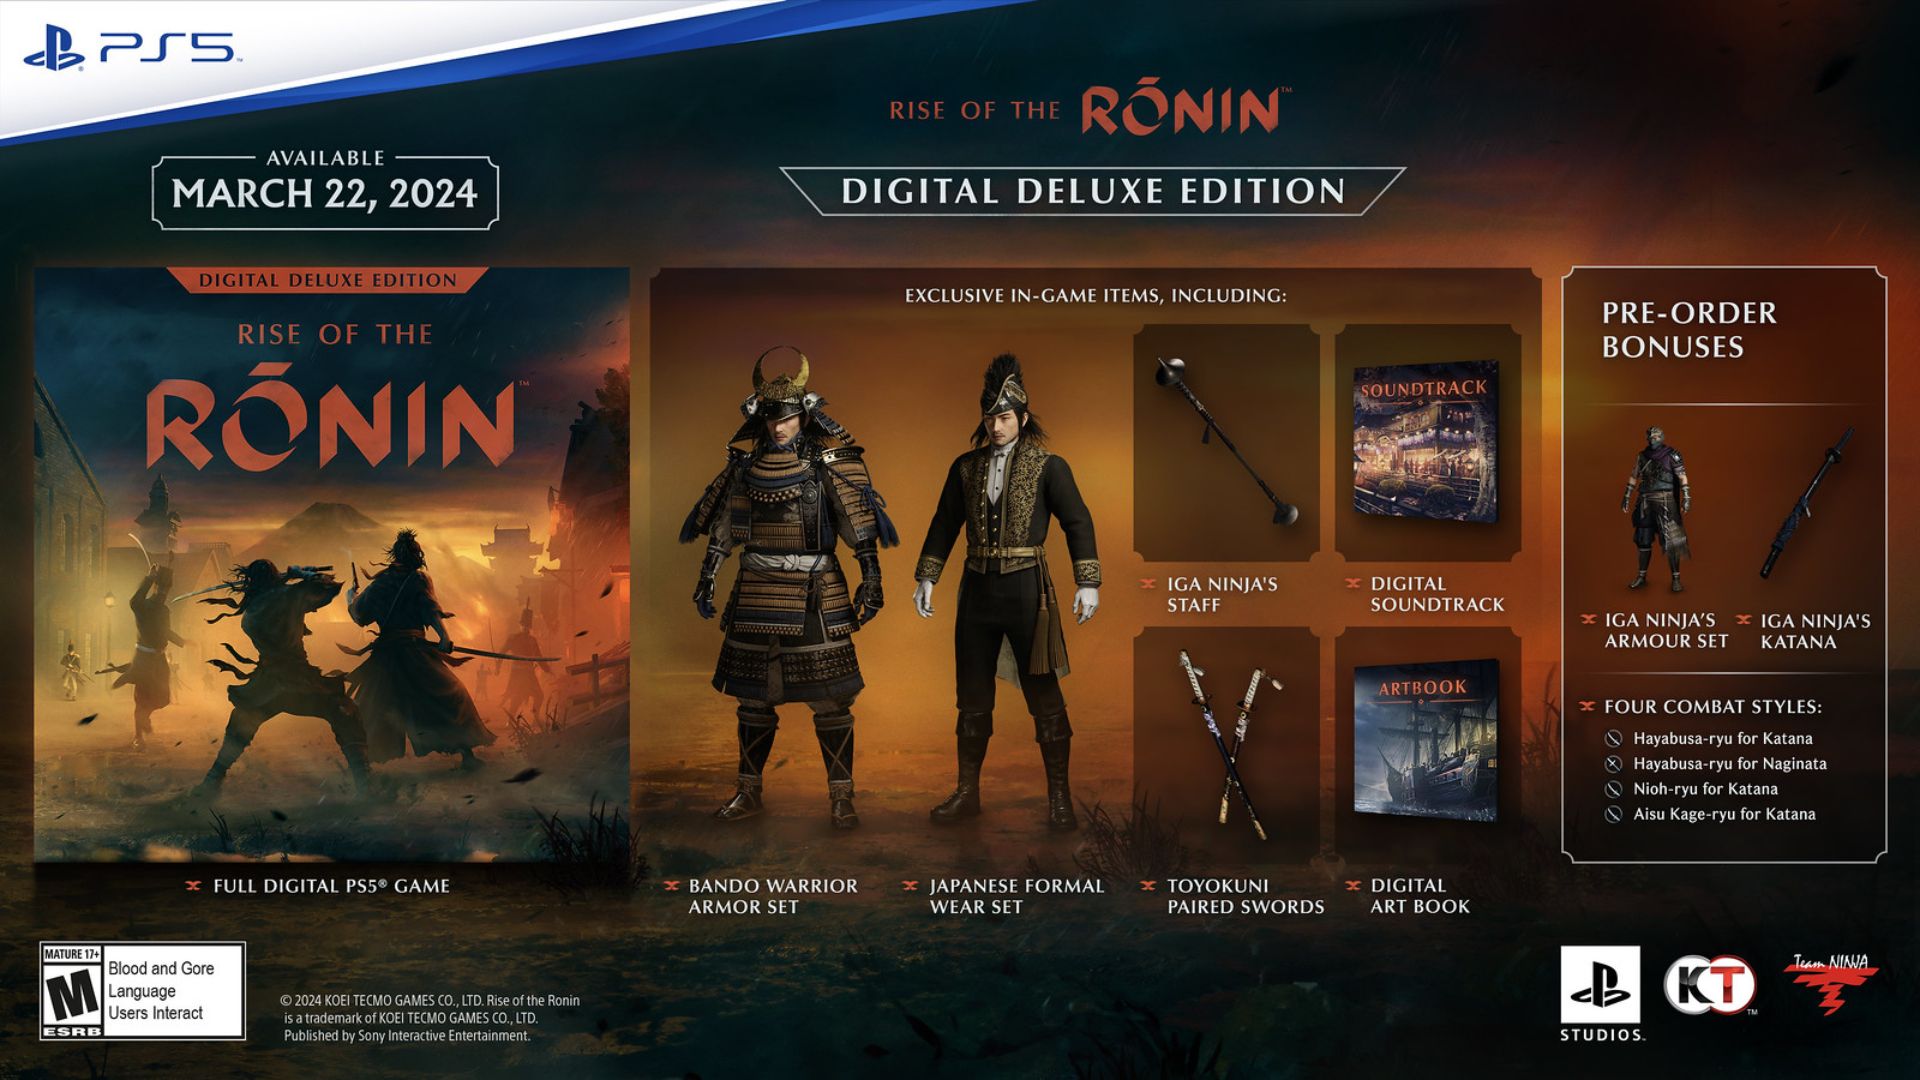 The Rise of the Ronin pre-order details